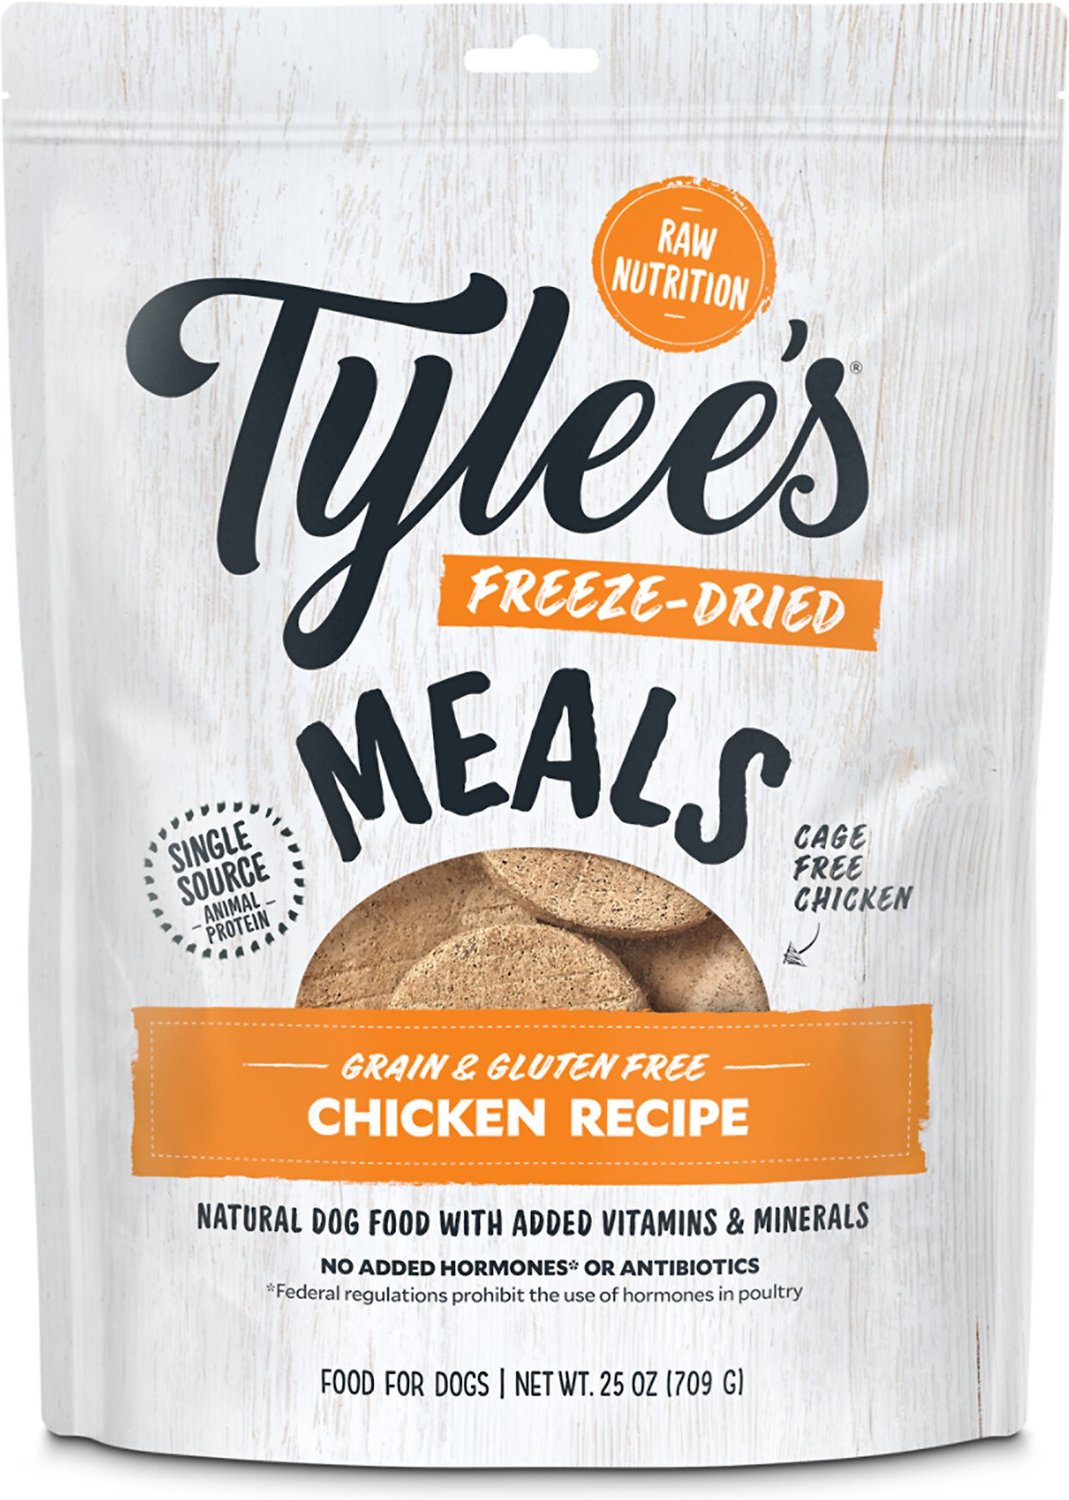 Tylee's Freeze-Dried Meals for Dogs, Chicken Recipe